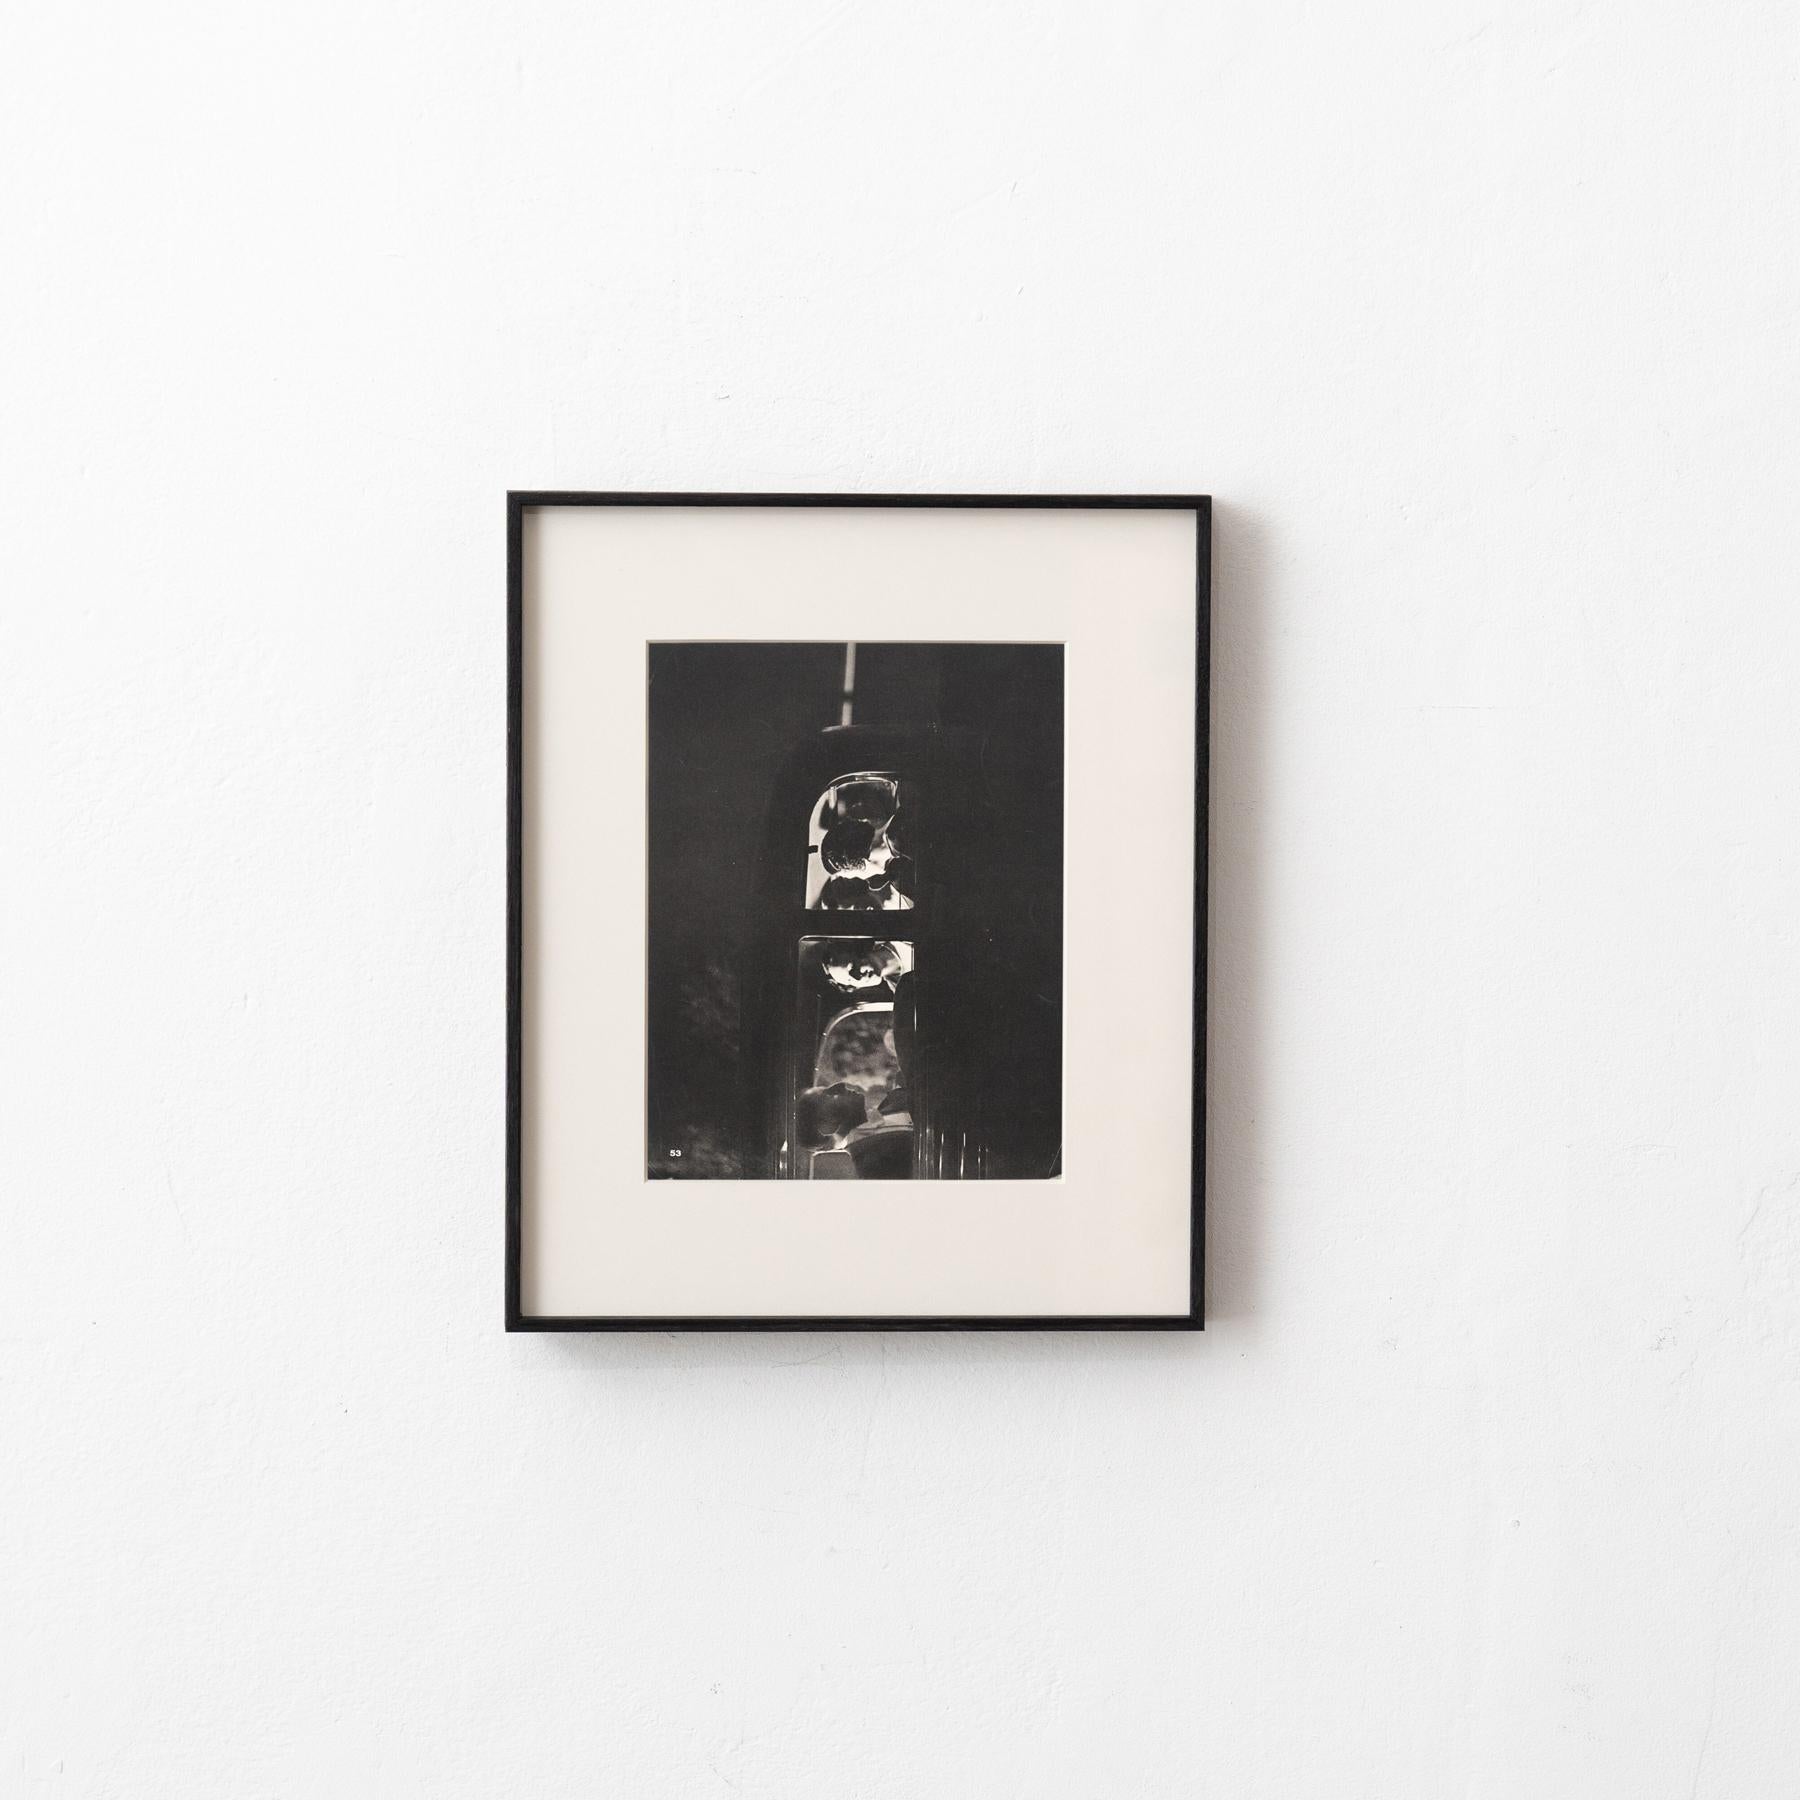 French Brassai Rare Black And White Framed Photography, circa 1930 For Sale